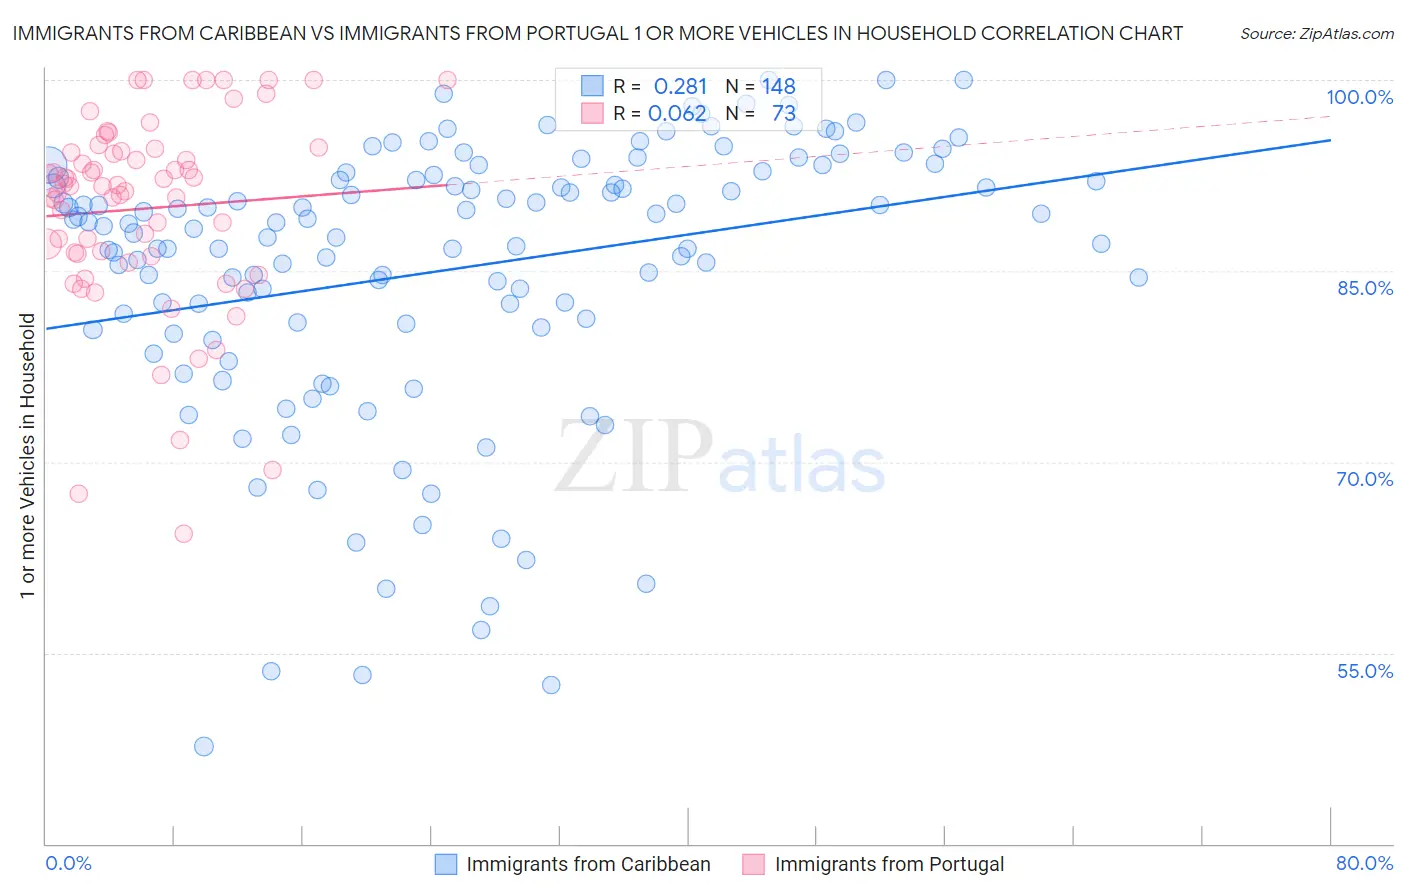 Immigrants from Caribbean vs Immigrants from Portugal 1 or more Vehicles in Household